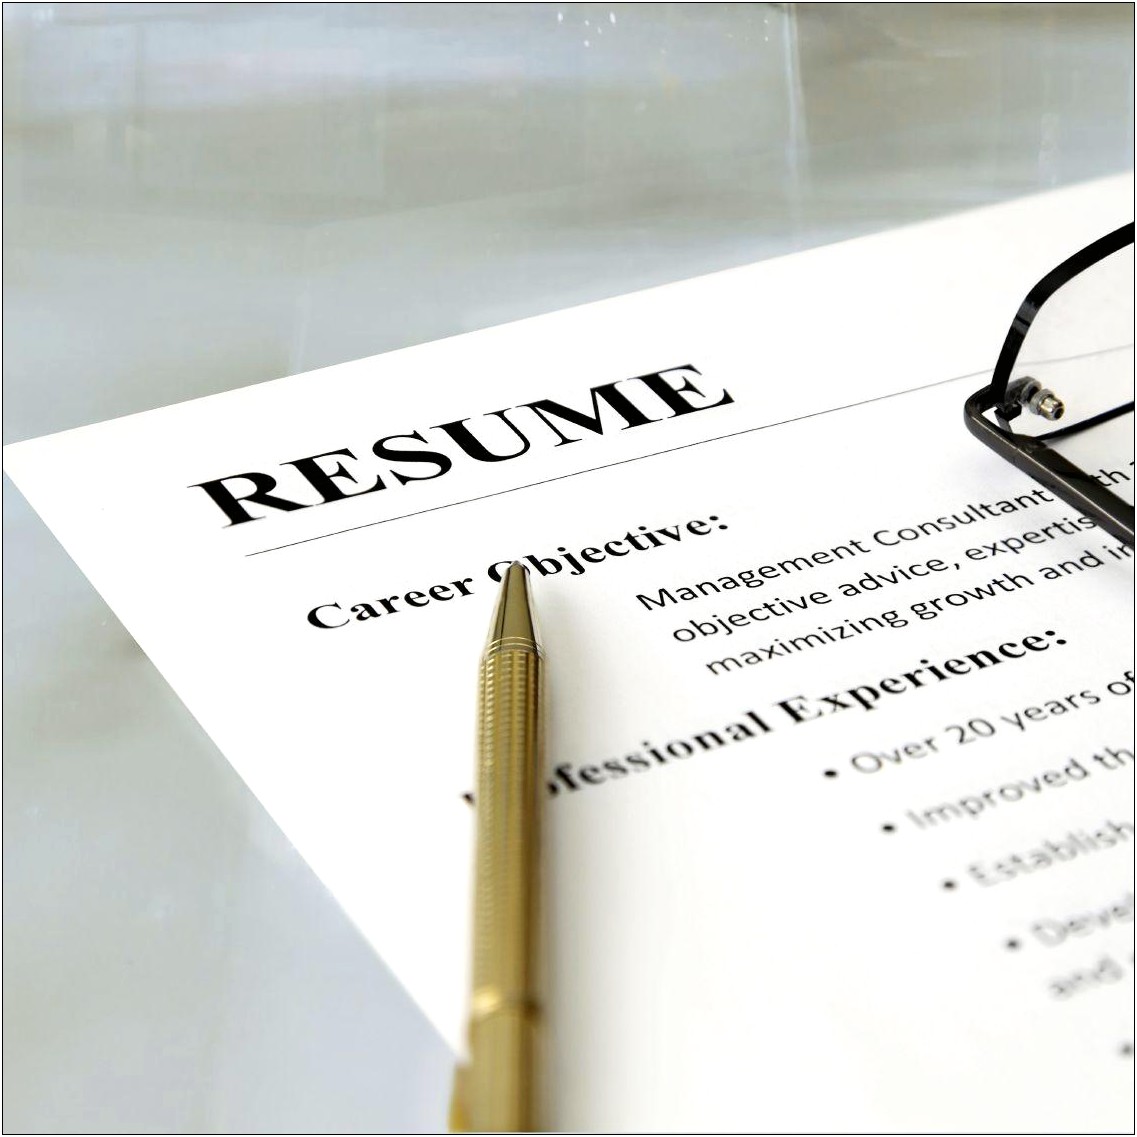 Great Objectives To Write On A Resume